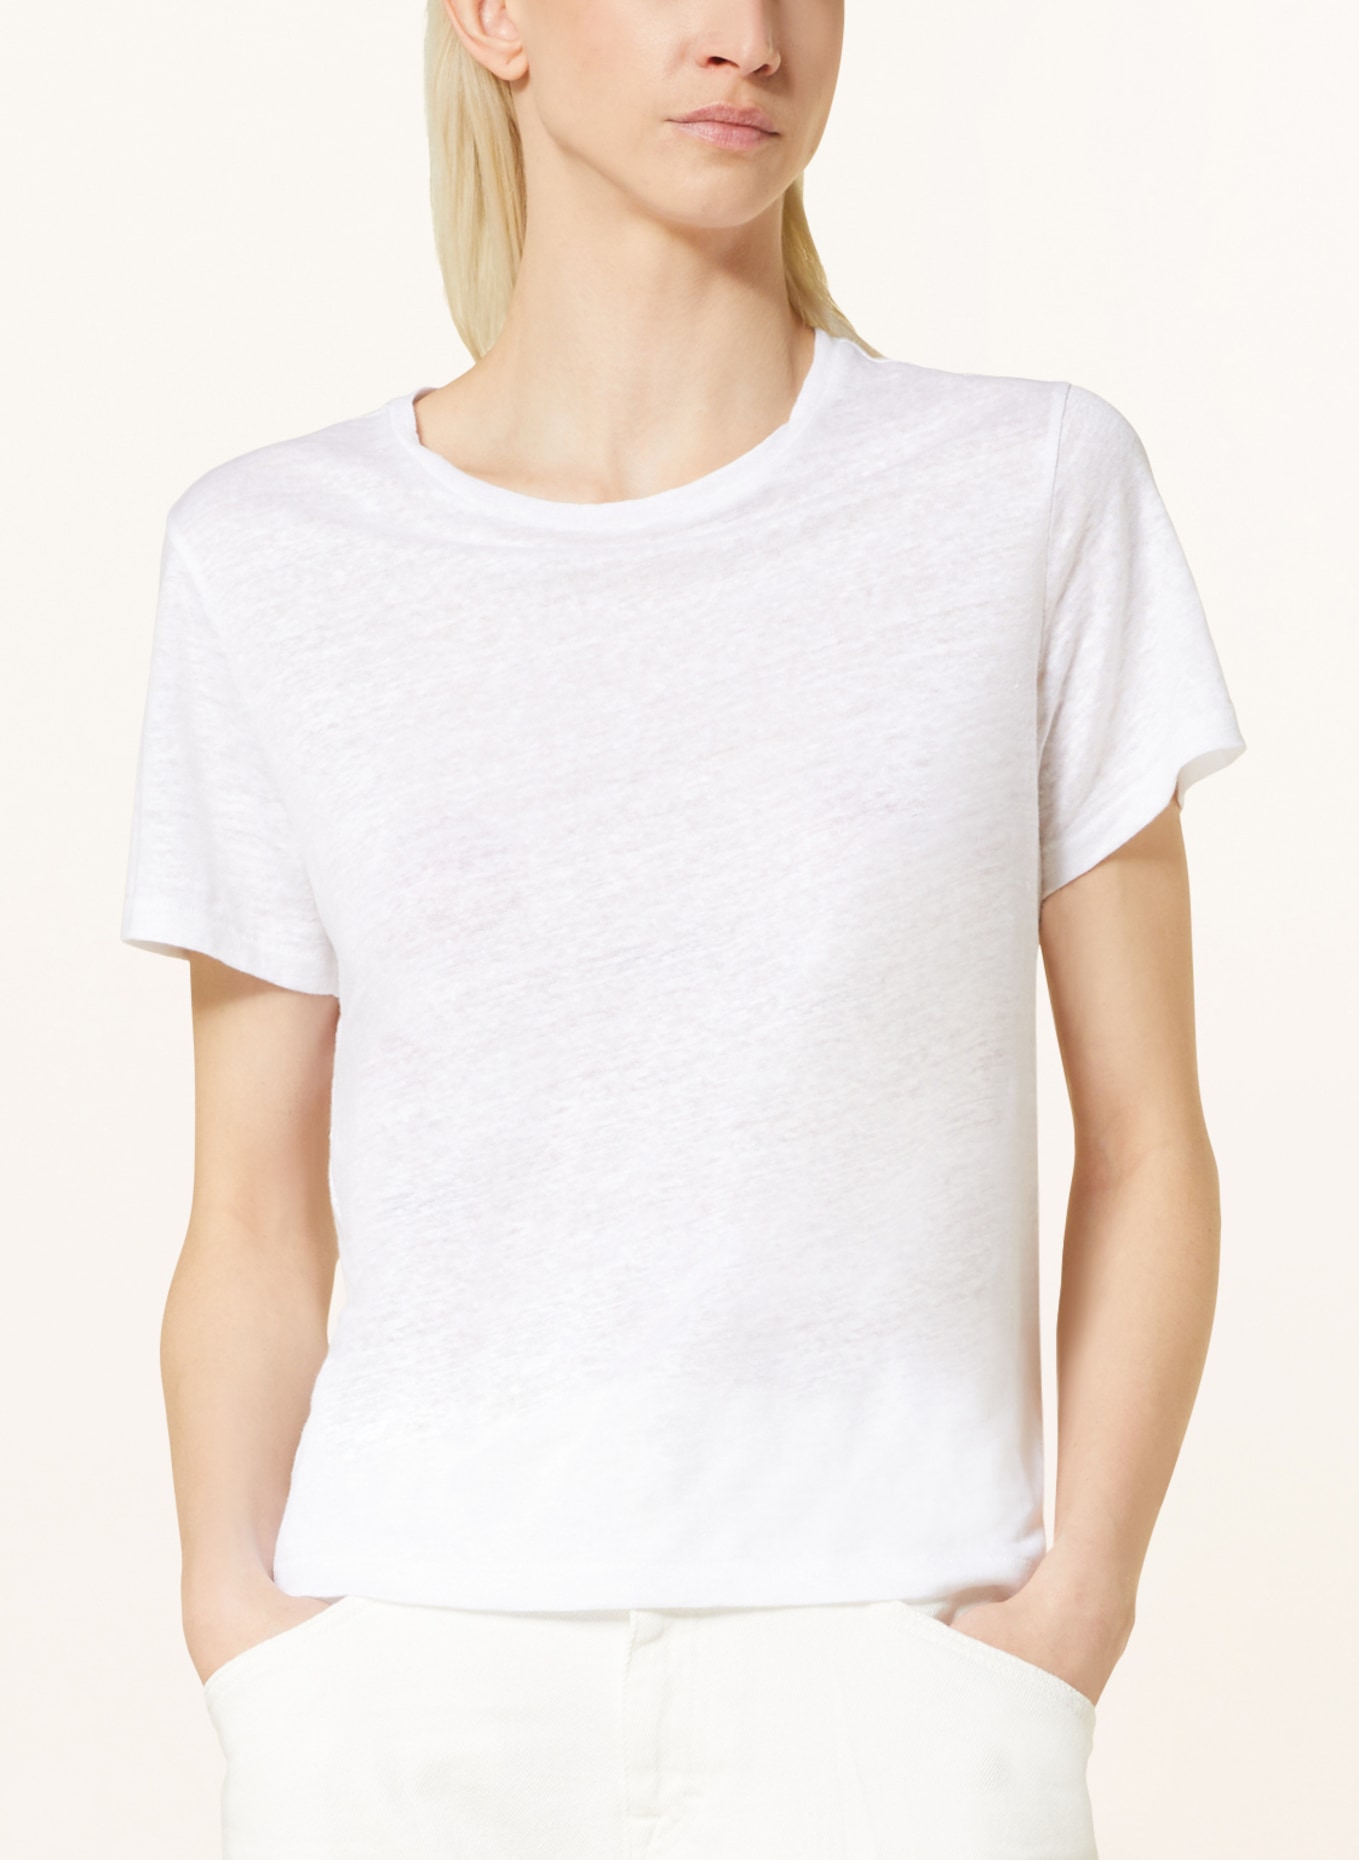 CLOSED T-shirt made of linen, Color: WHITE (Image 4)